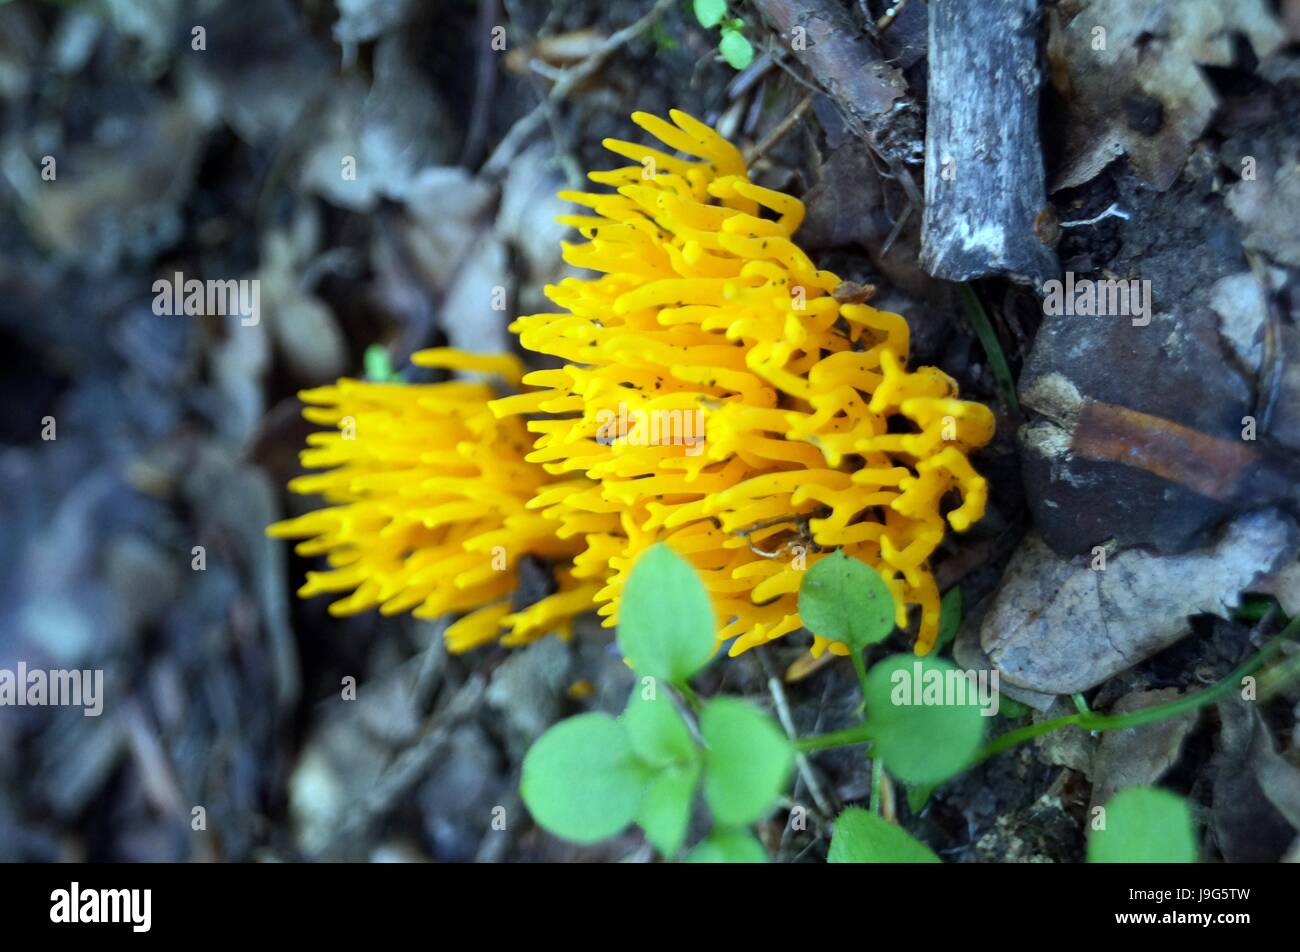 Mushroom Hericium koralloides bright yellow color growing in the forest Stock Photo